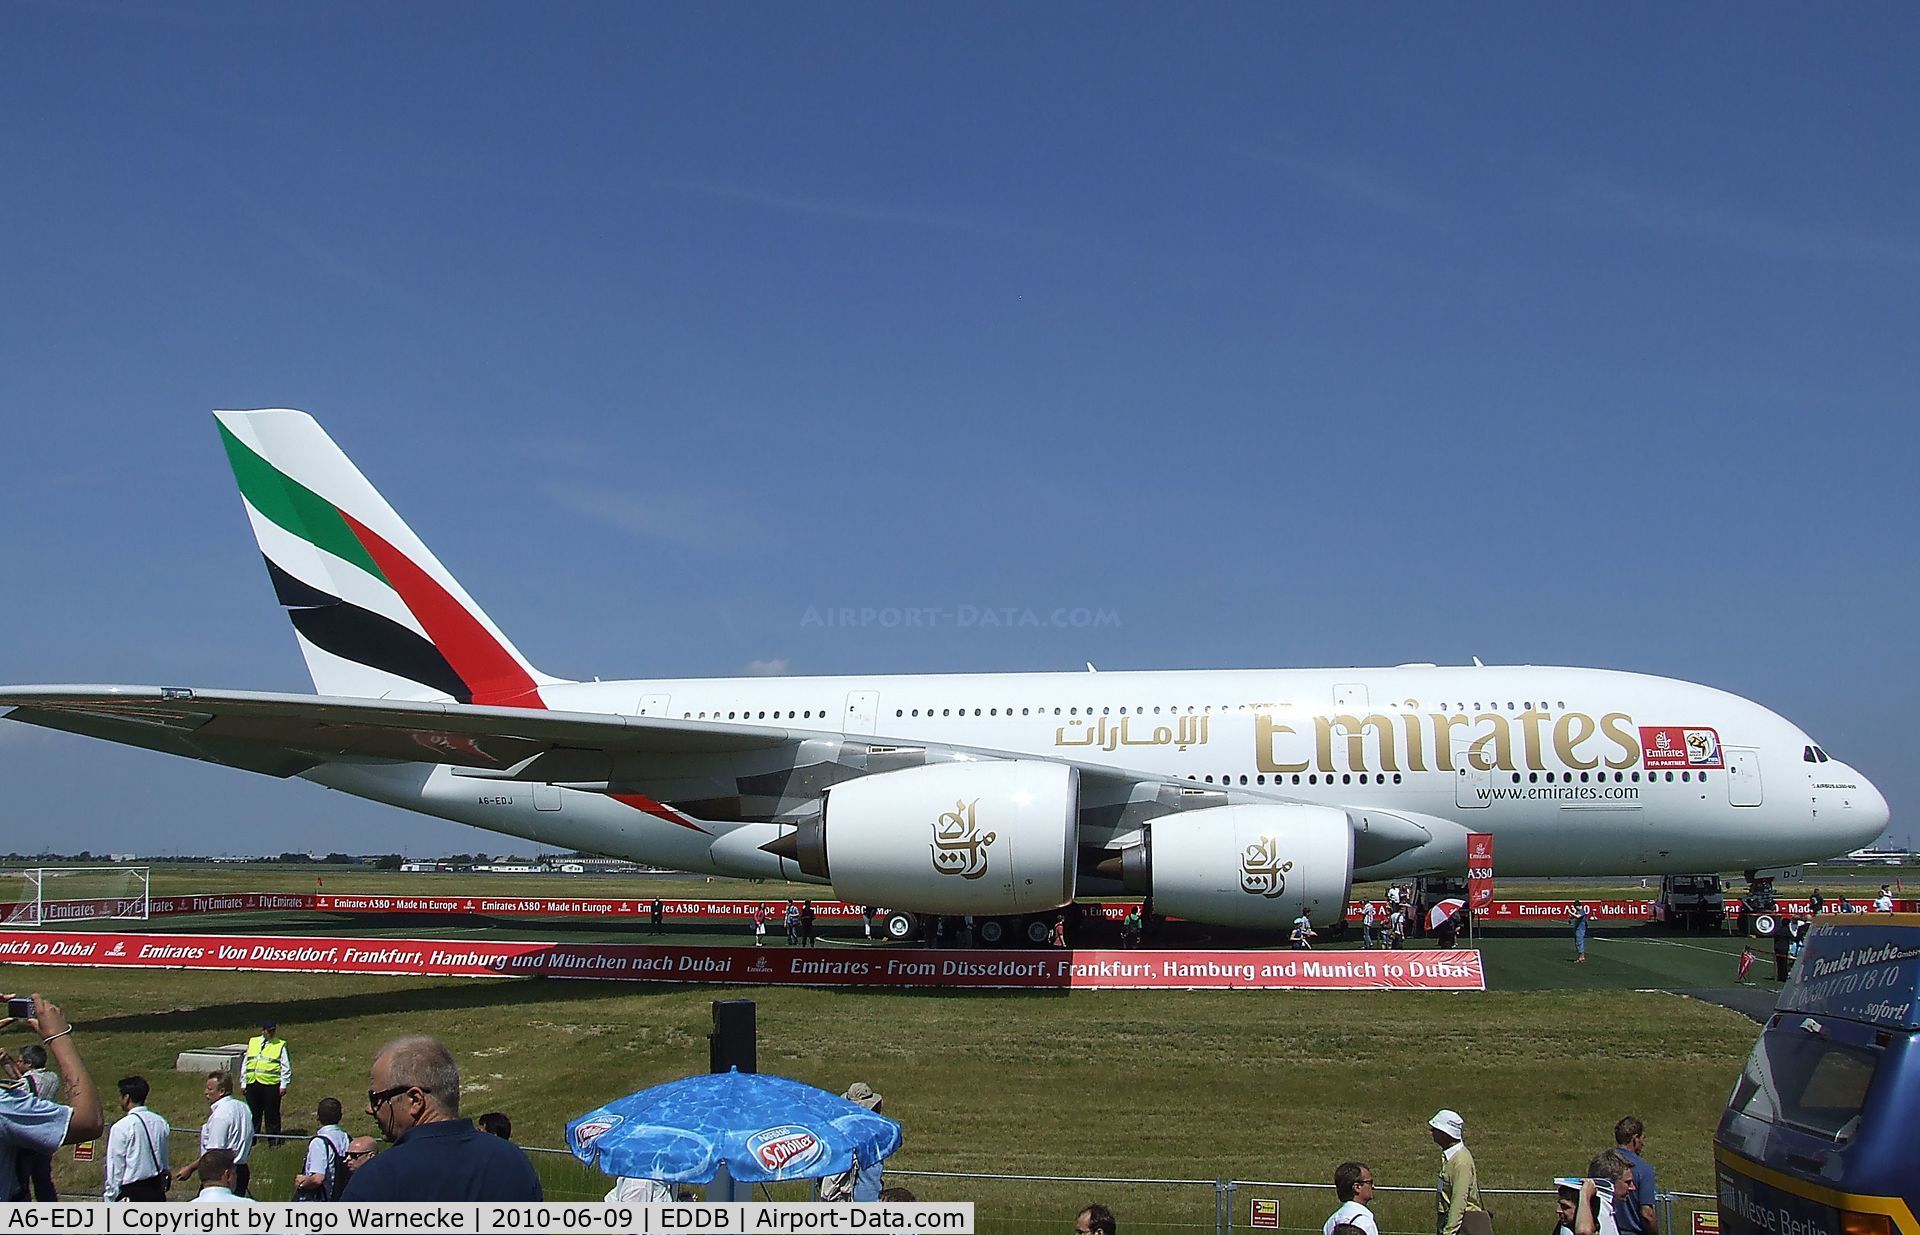 A6-EDJ, 2006 Airbus A380-861 C/N 009, Airbus A380-861 of Emirates at ILA 2010, Berlin